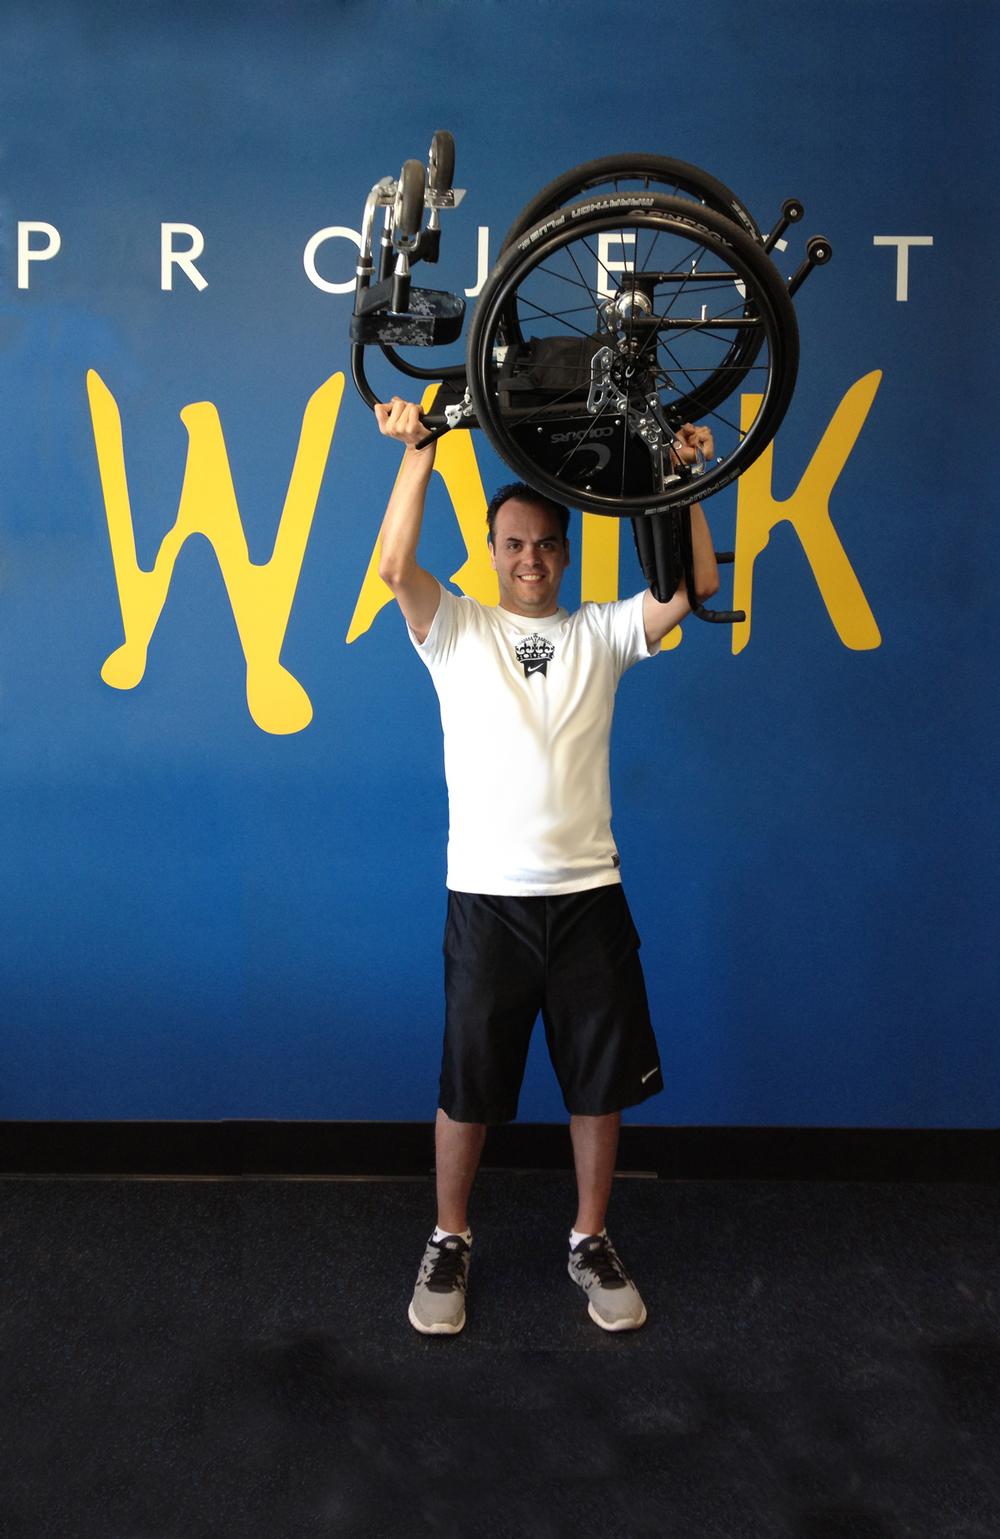 Project Walk patient Brandon Rayburn was injured while snowboarding